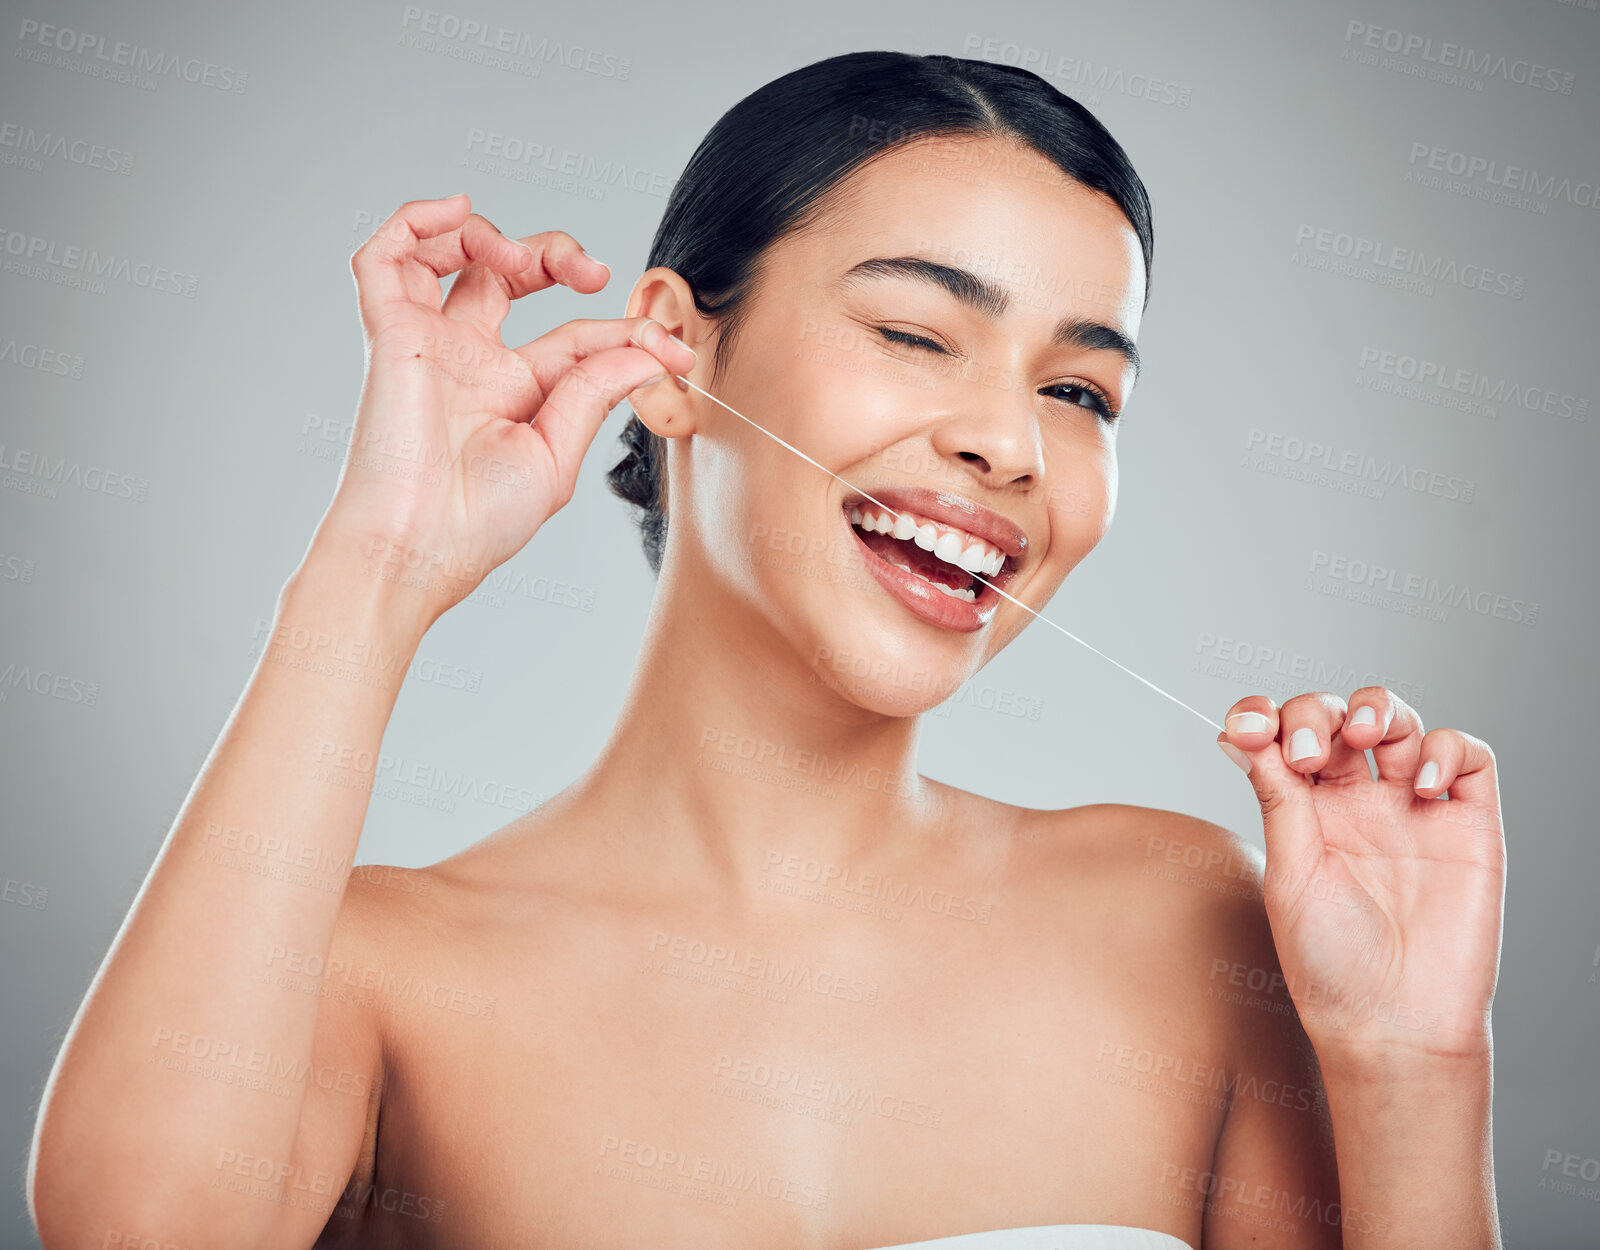 Buy stock photo Studio portrait of a smiling mixed race young woman with glowing skin posing against grey copyspace background while flossing her teeth for fresh breath. Hispanic model using floss to prevent a cavity